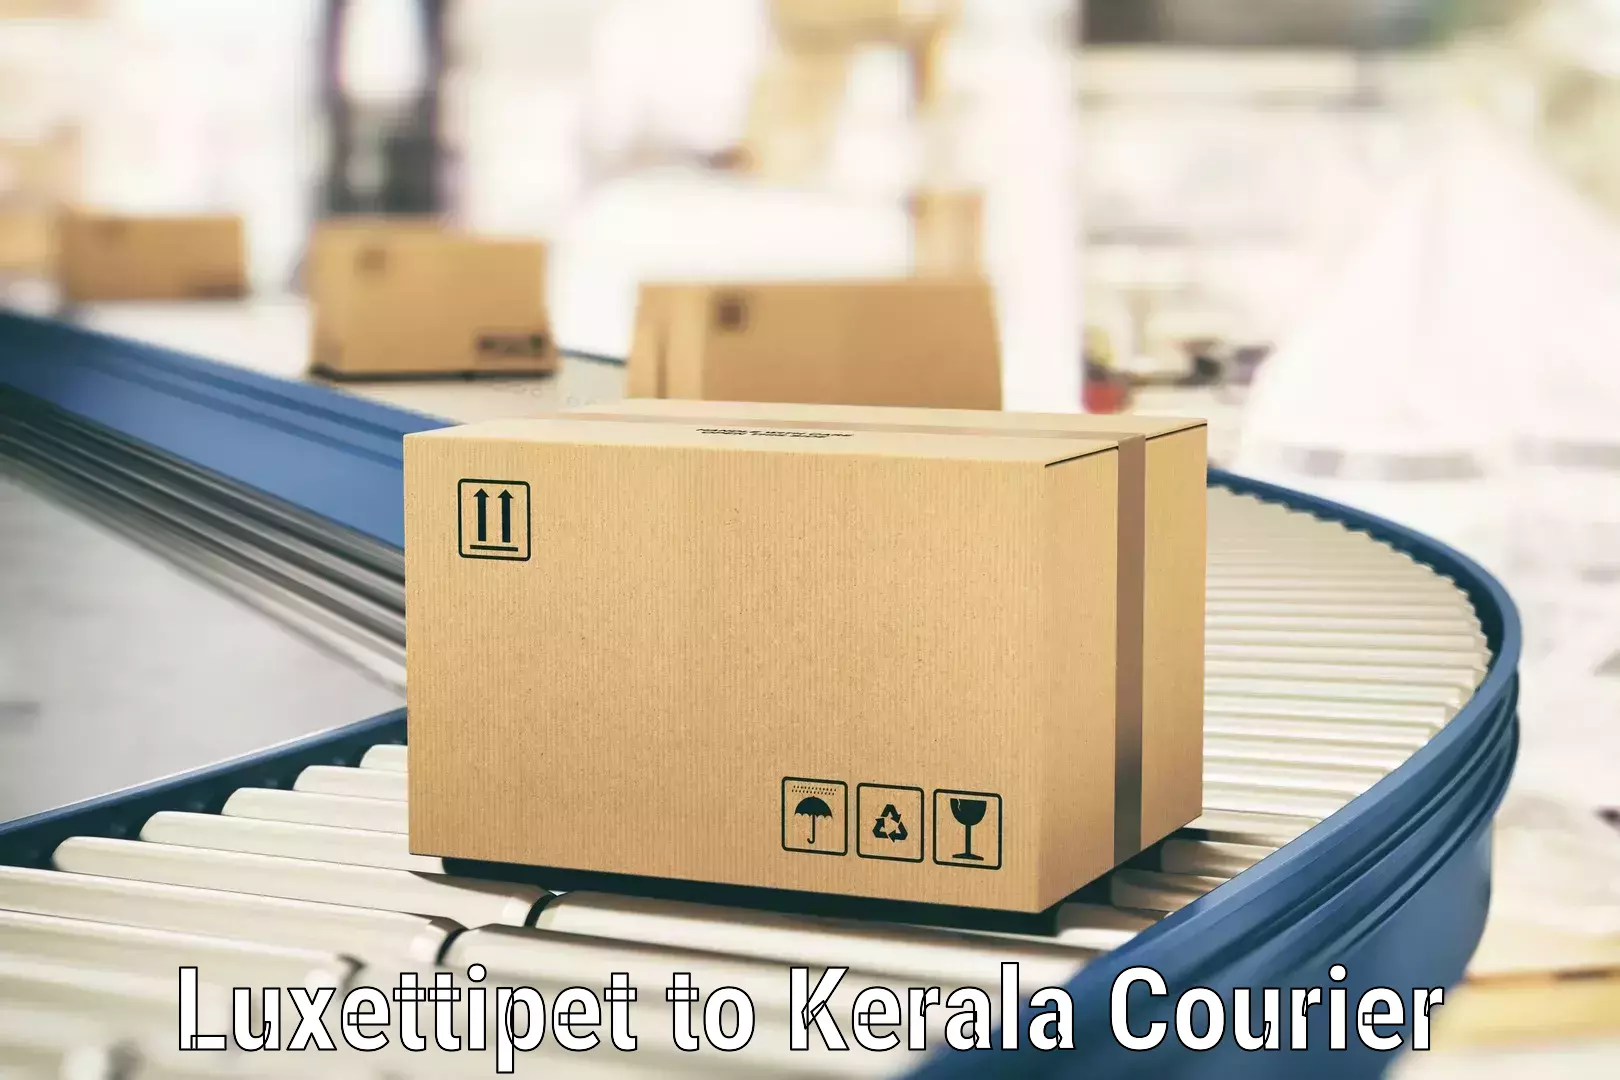 Customized delivery options in Luxettipet to Cherthala